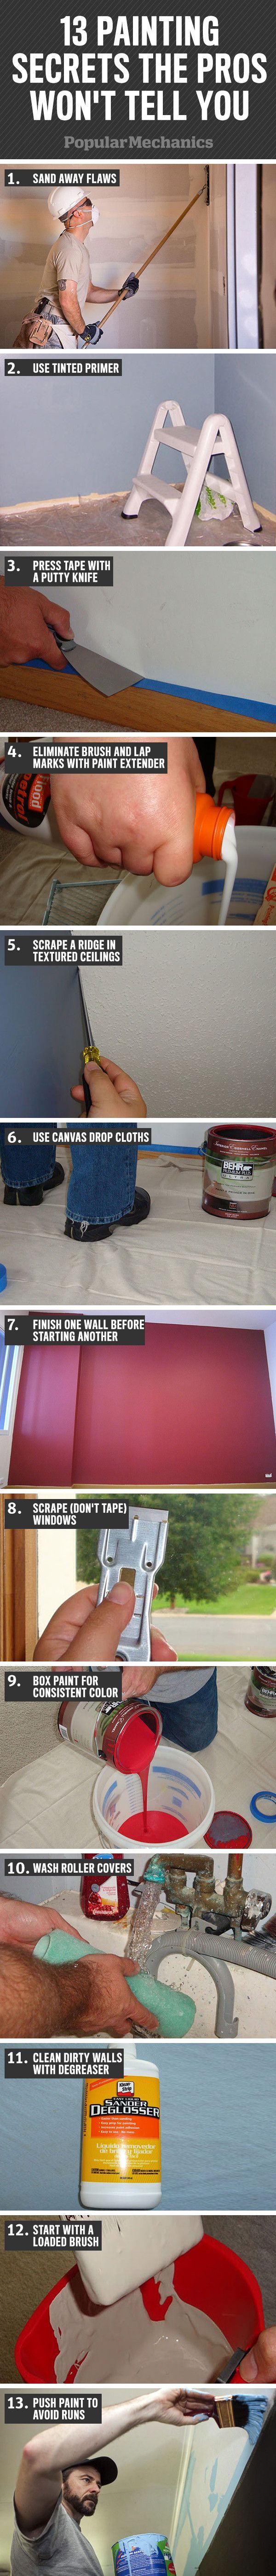 13 Painting Secrets the Pros Won't Tell You